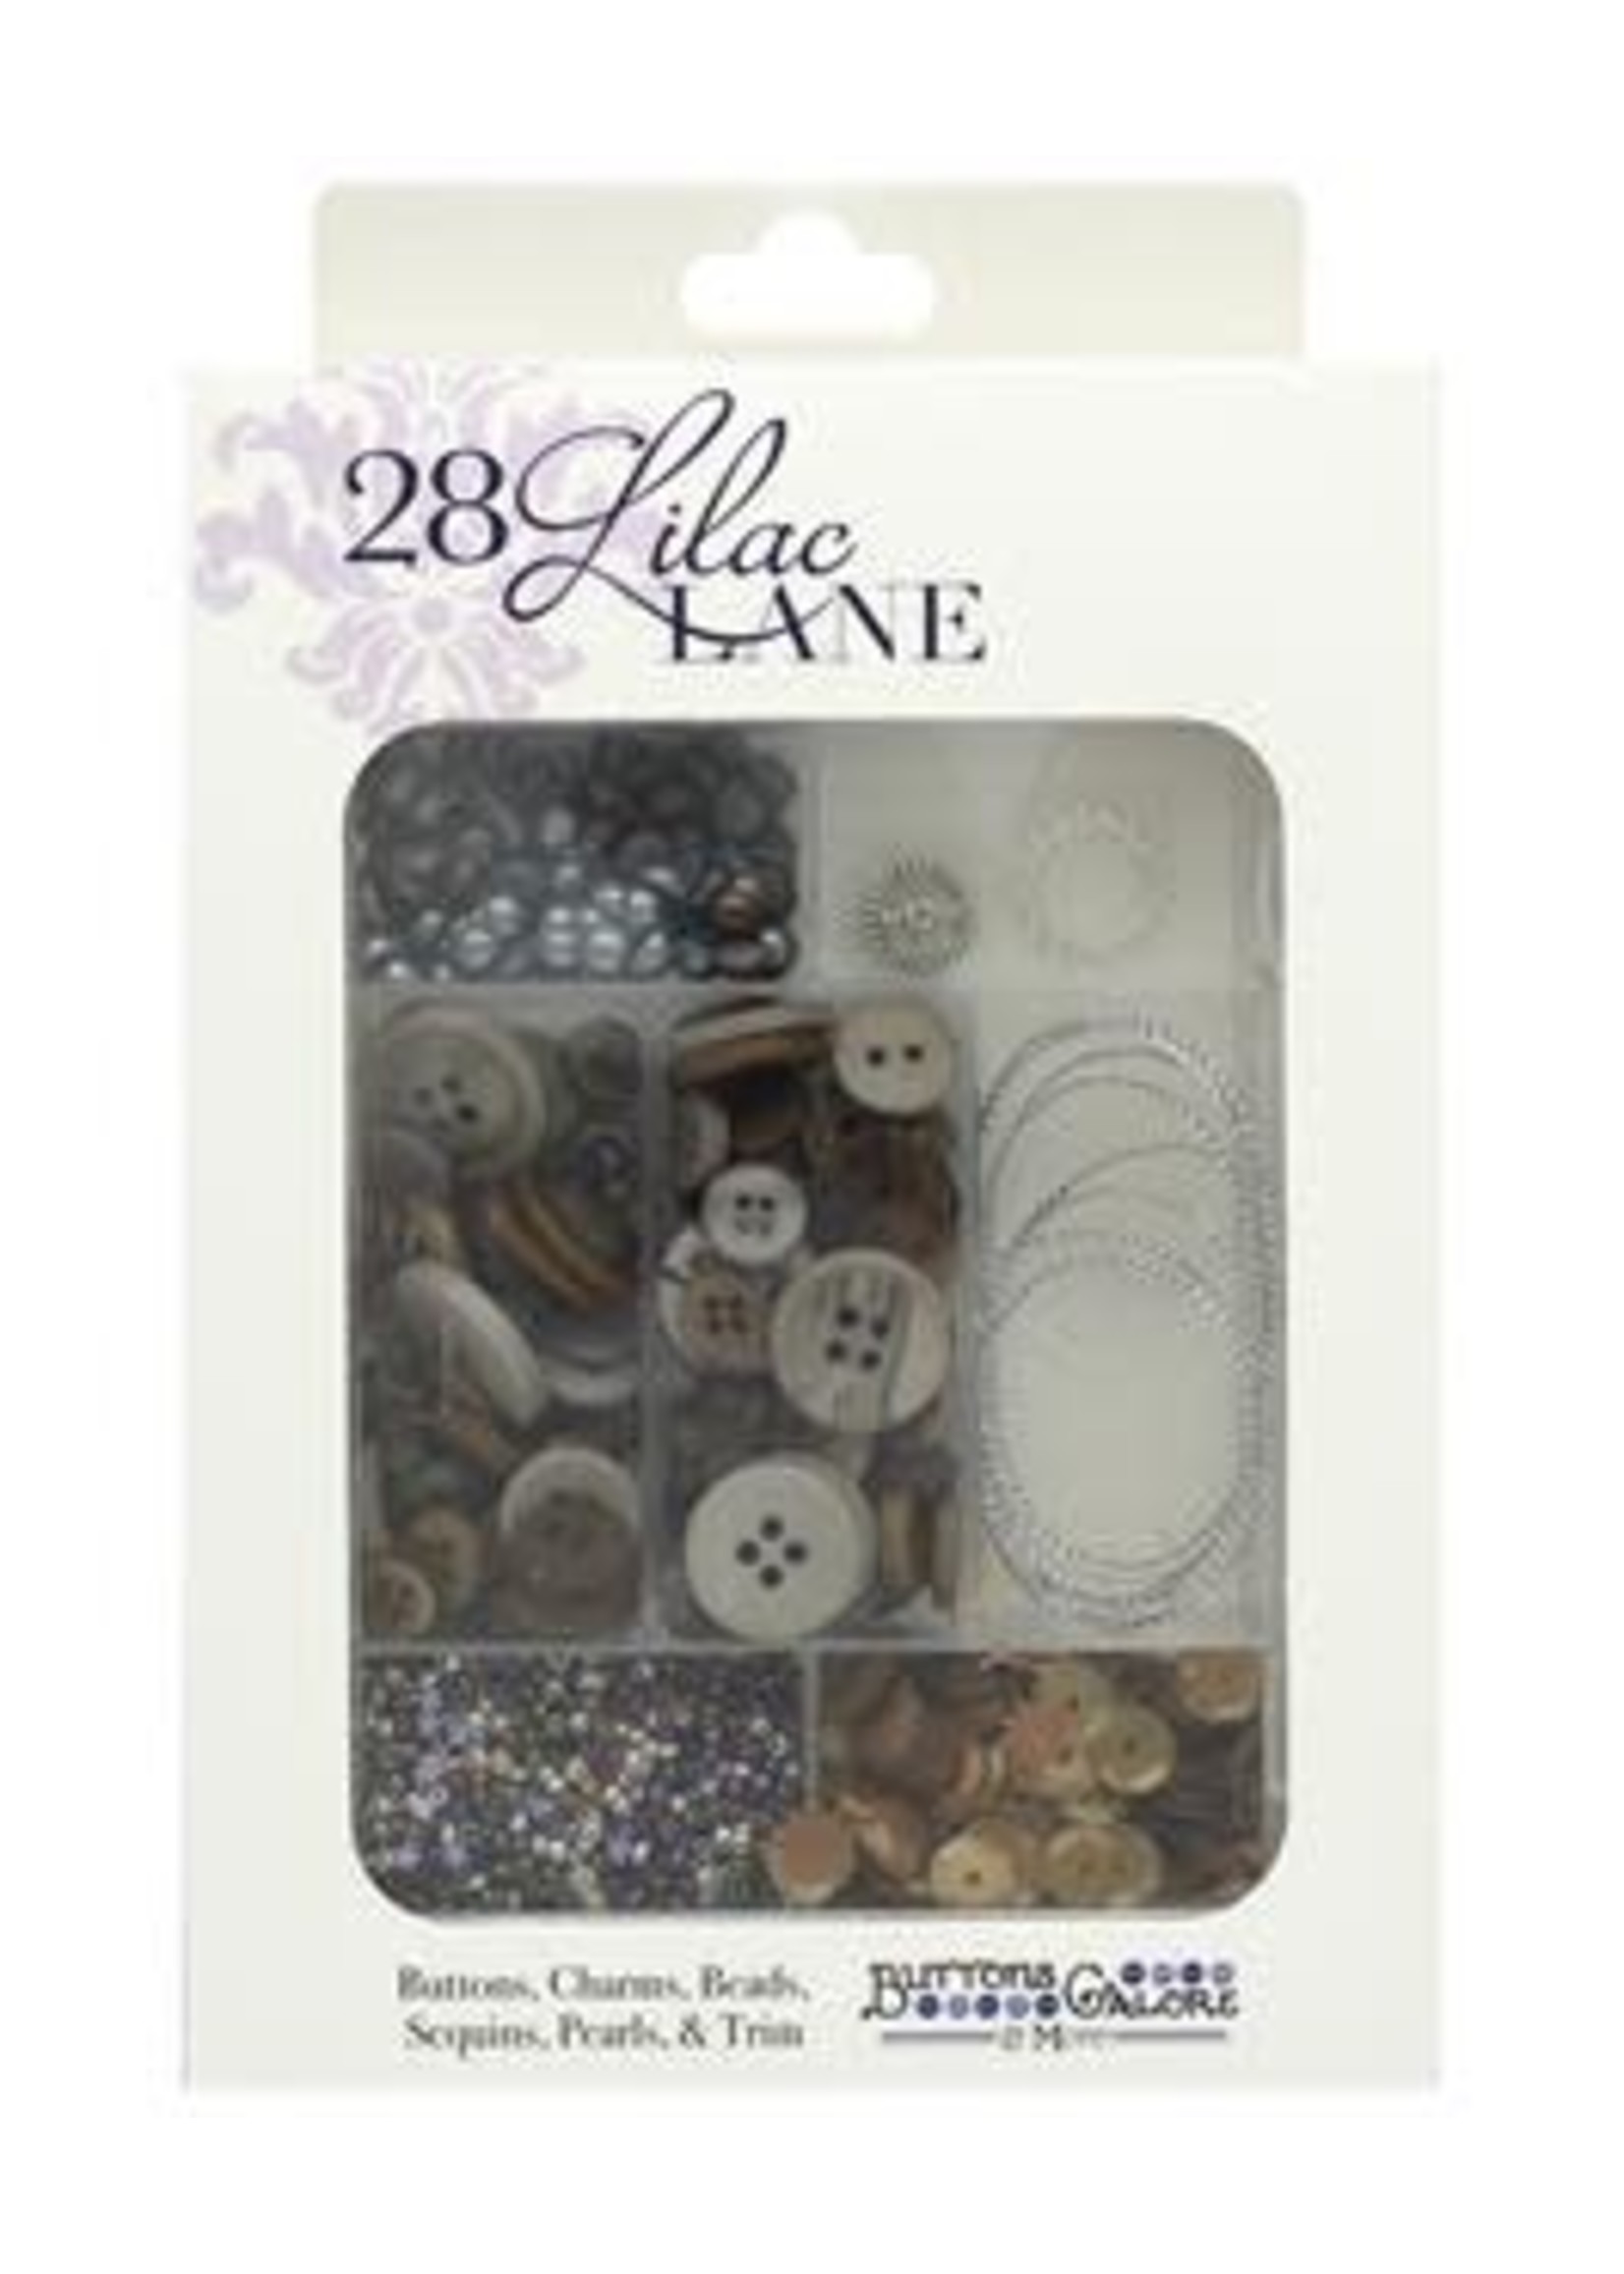 Buttons Galore 28 Lilac Lane Embellishment Kit In Gear